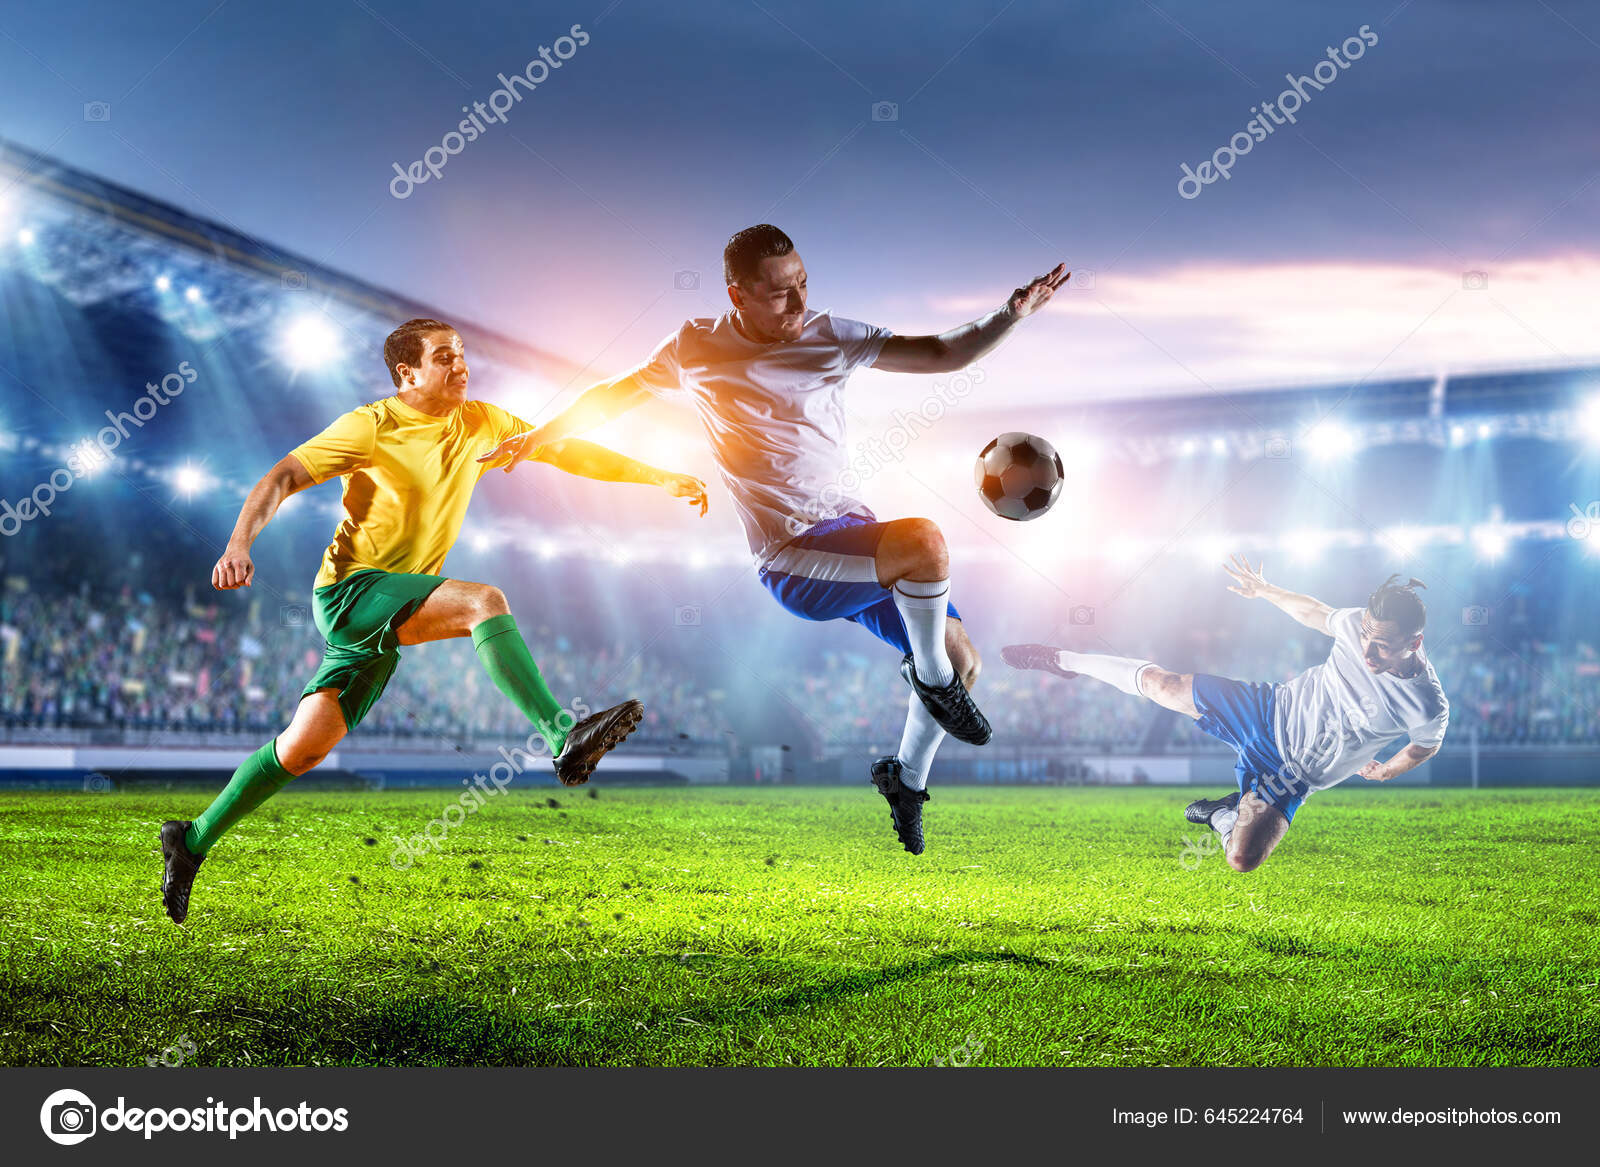 Sport Online Concept Mixed Media Stock Photo by ©SergeyNivens 645224764